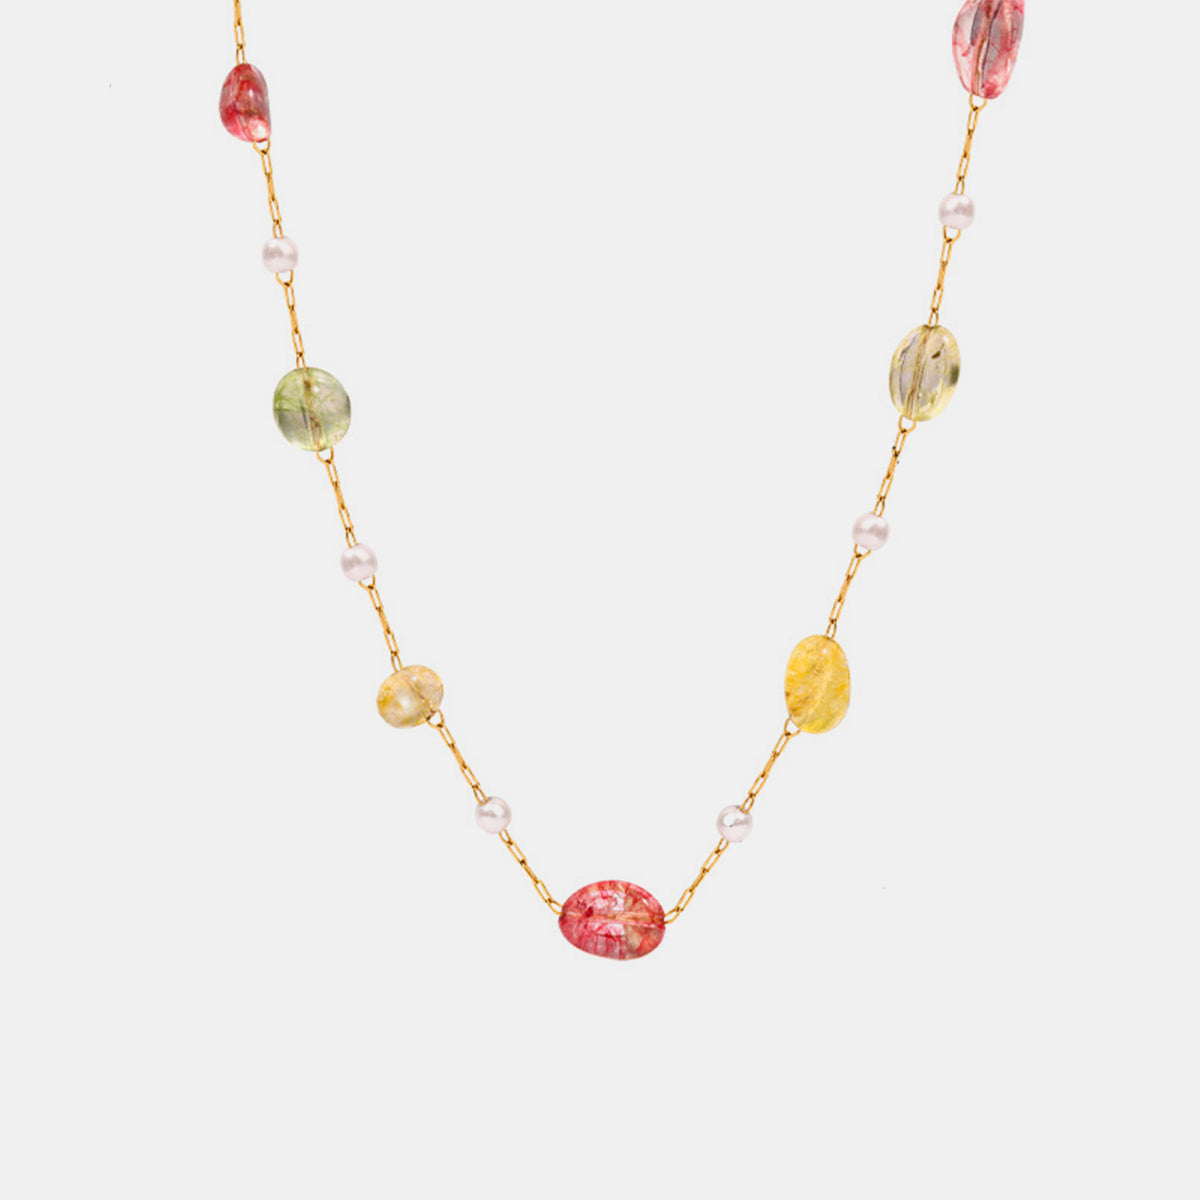 Titanium Steel Gold-plated Bead Necklace